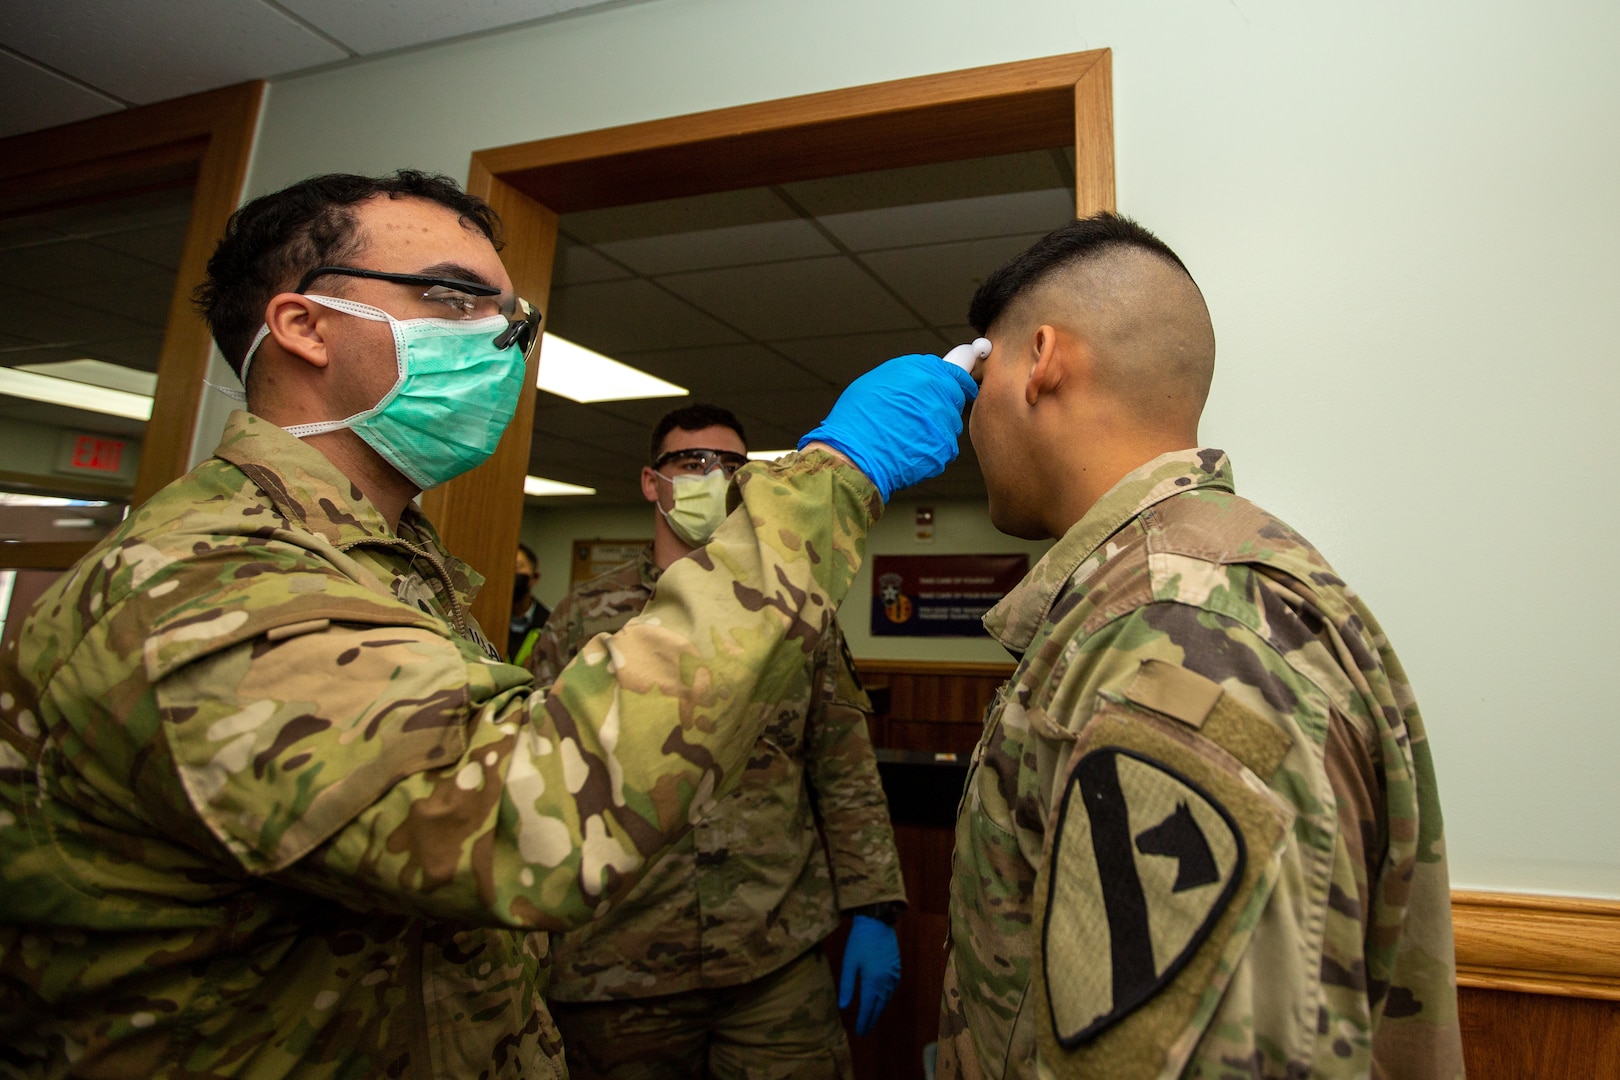 A uniformed soldier wears a face mask while taking the temperature of another soldier.